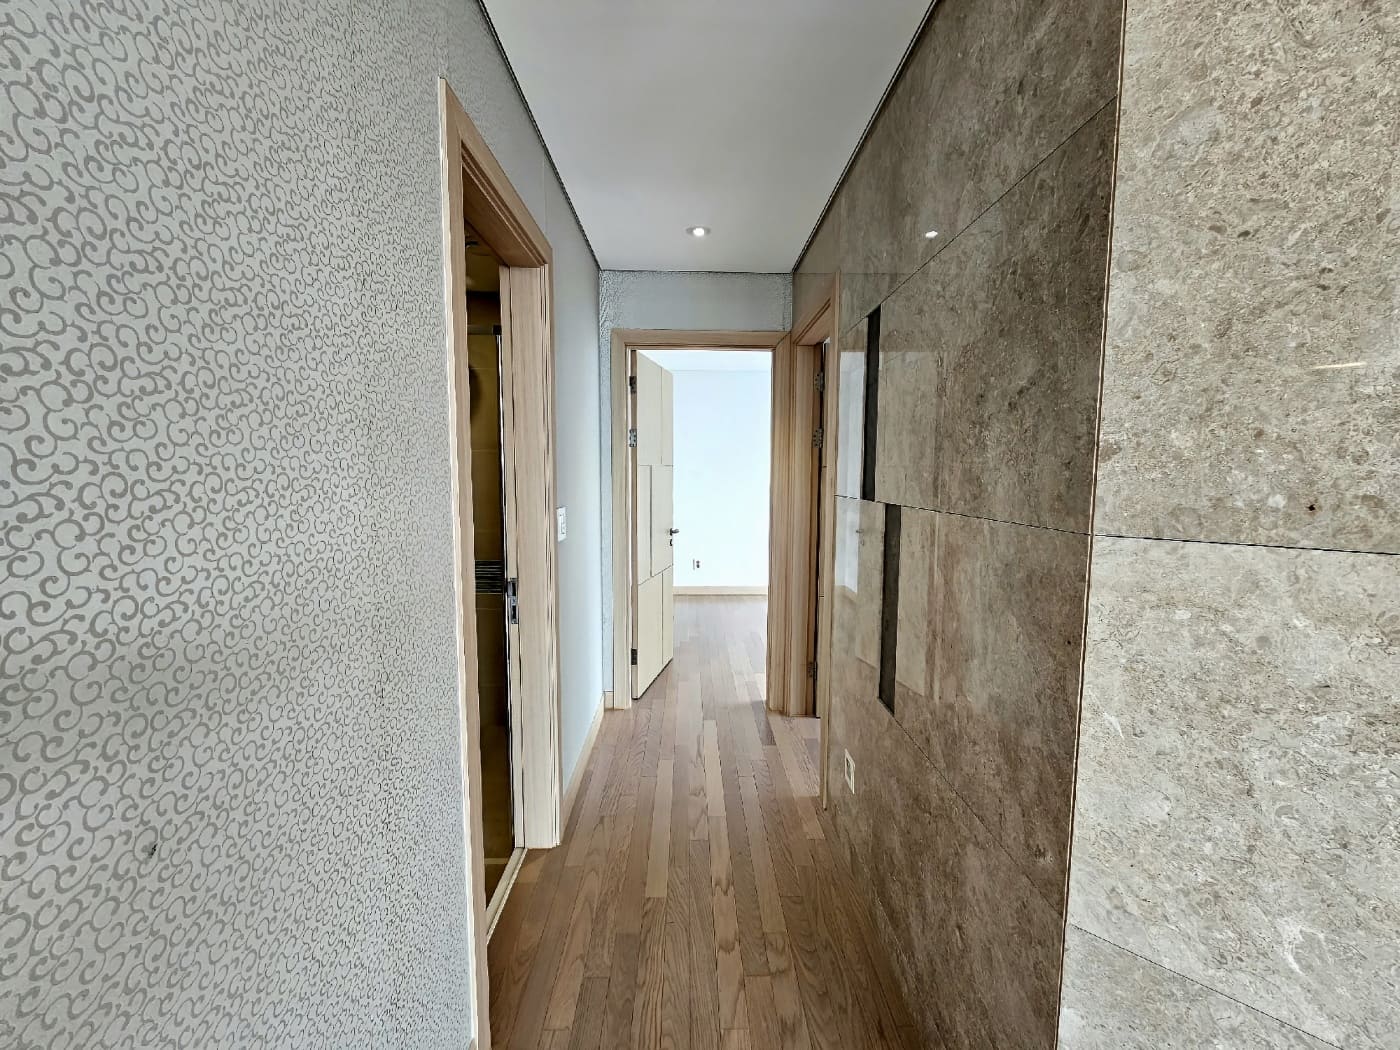 Hallway to the small rooms